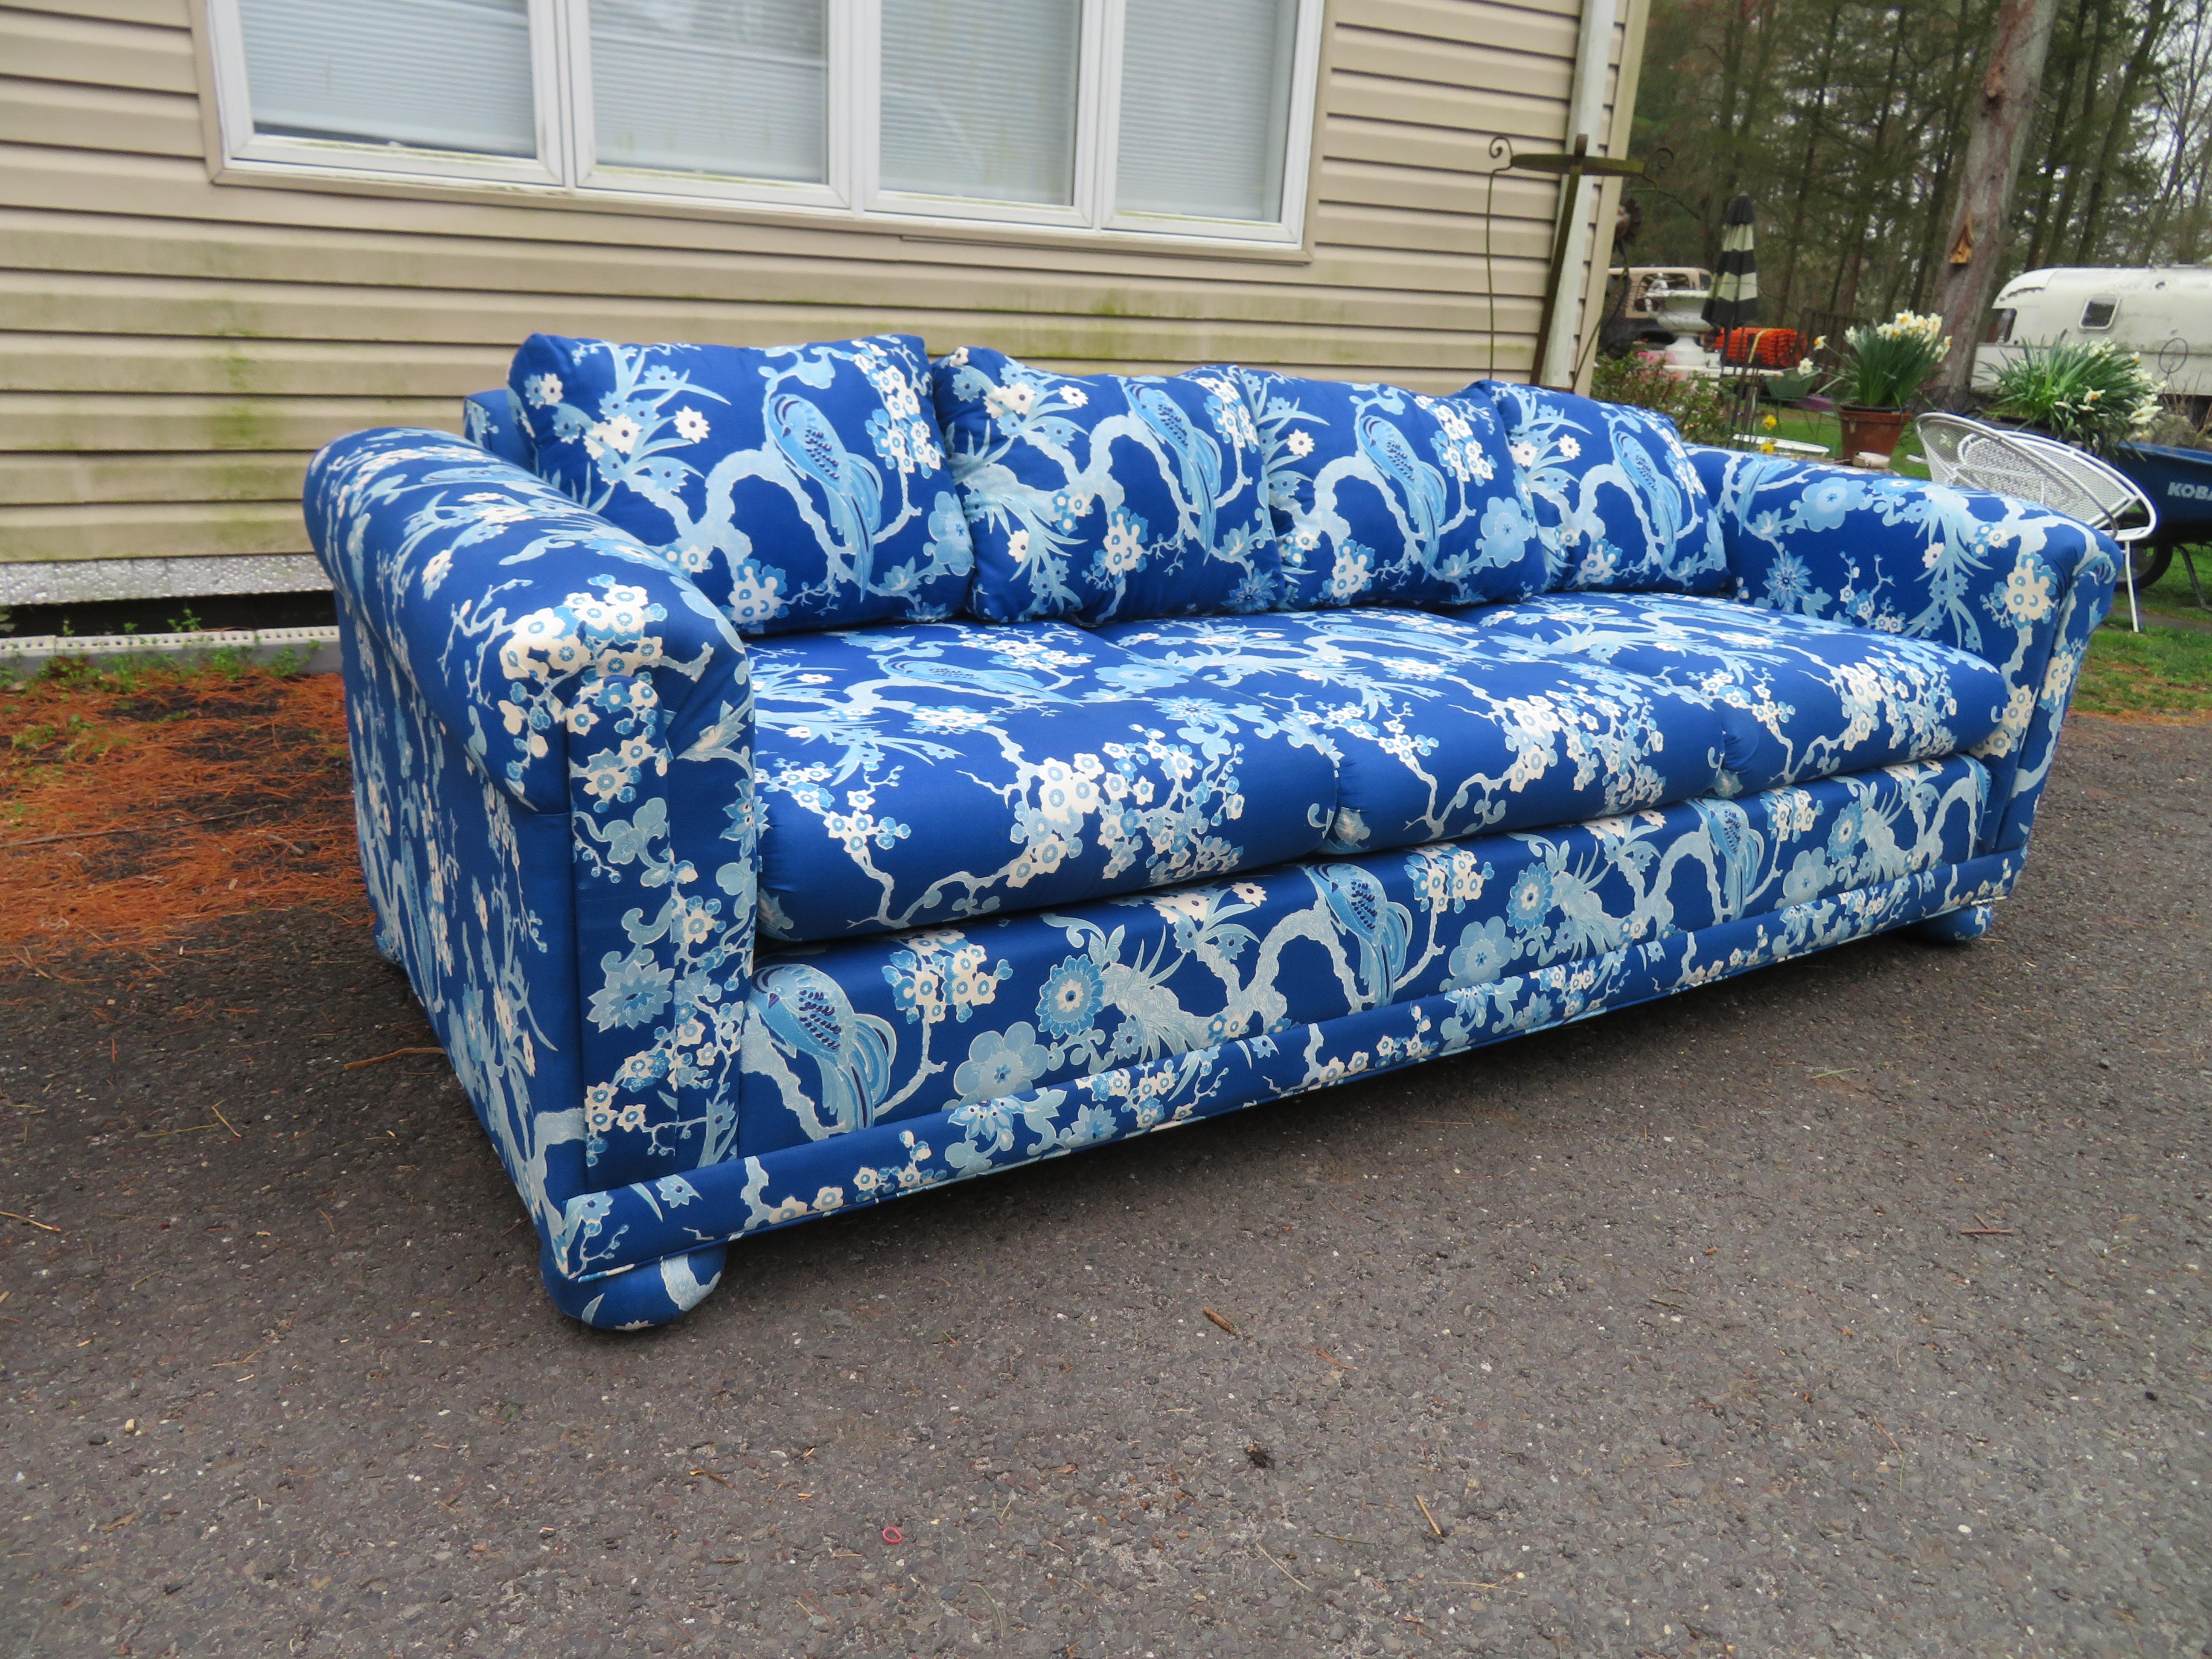 Stunning Chinoiserie style upholstered sofa with fabulous vintage bird of paradise floral fabric. This stylish sofa is actually all the rage right now and is in remarkable vintage condition. We just love the bold blue and white Chinoiserie fabric